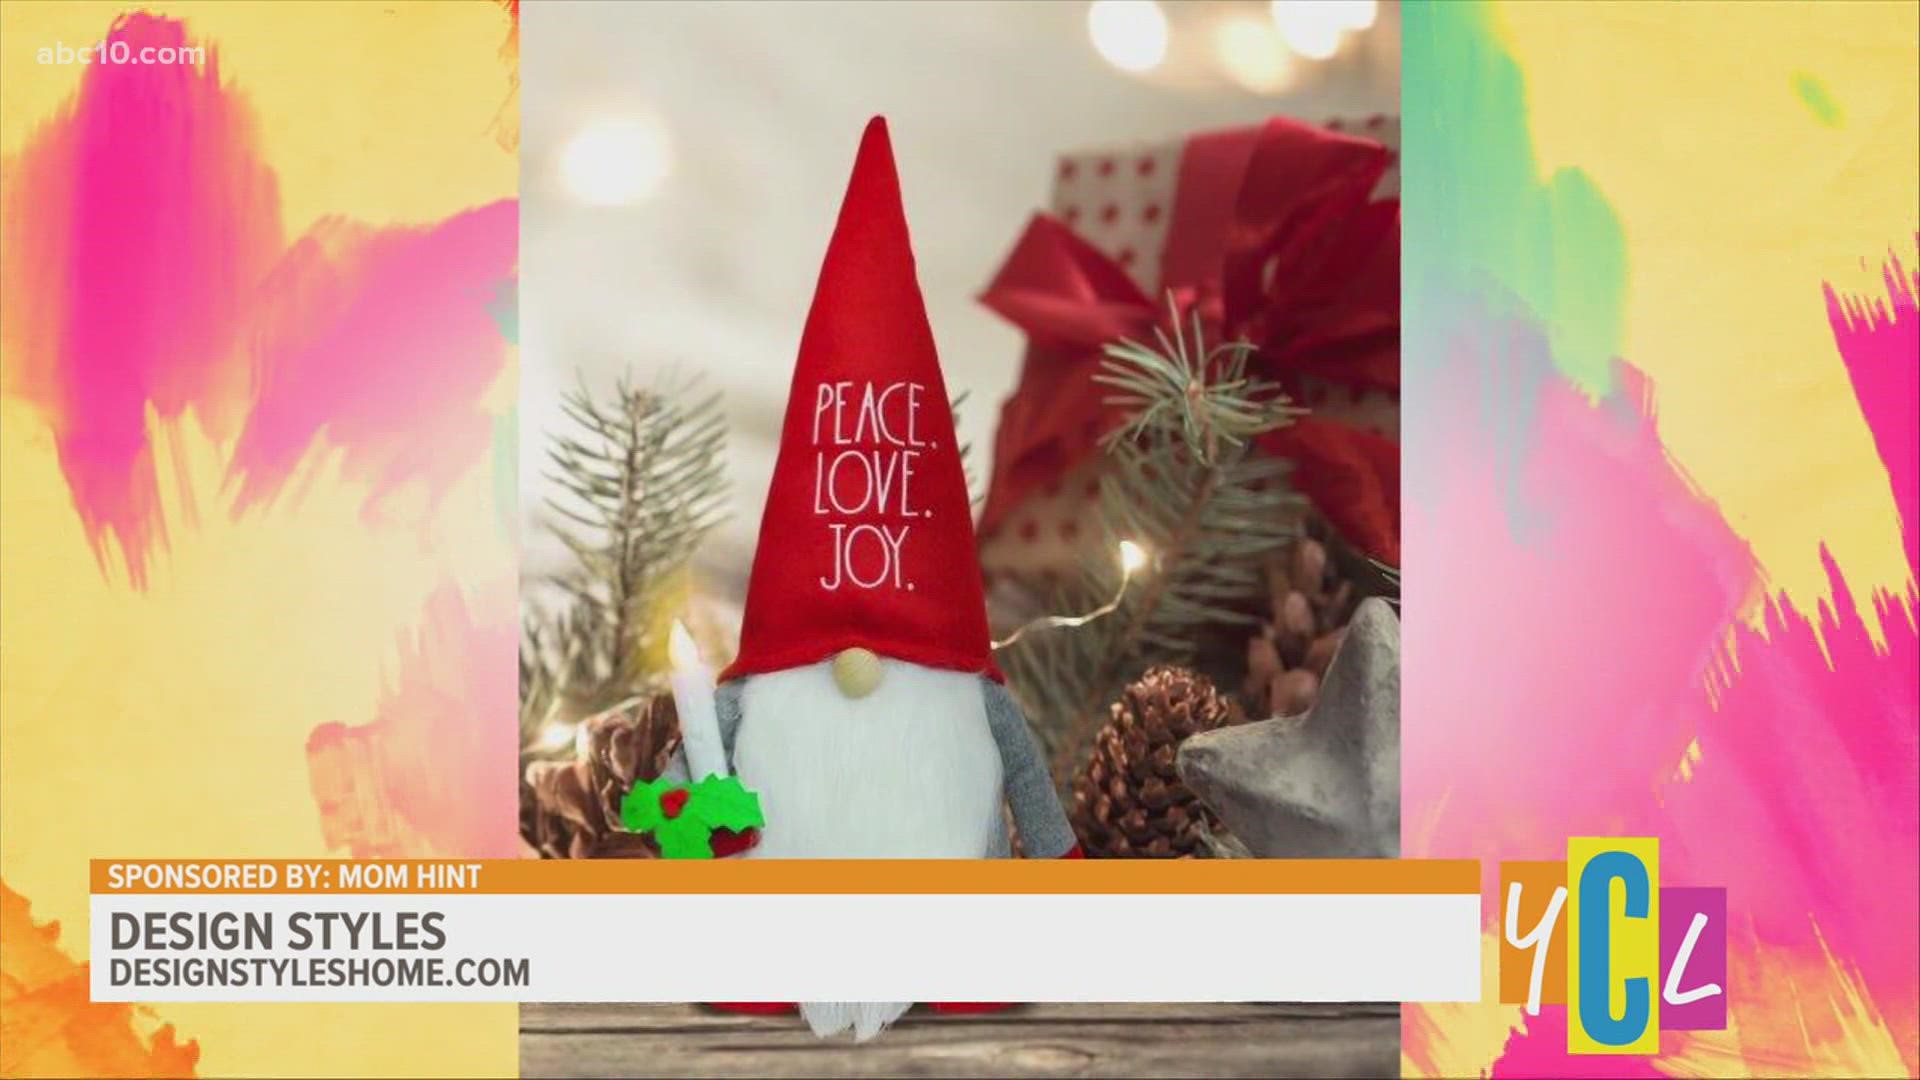 A parenting expert shares holiday entertaining and decorating ideas to host the perfect get together this holiday season. This segment paid for by Mom Hint.